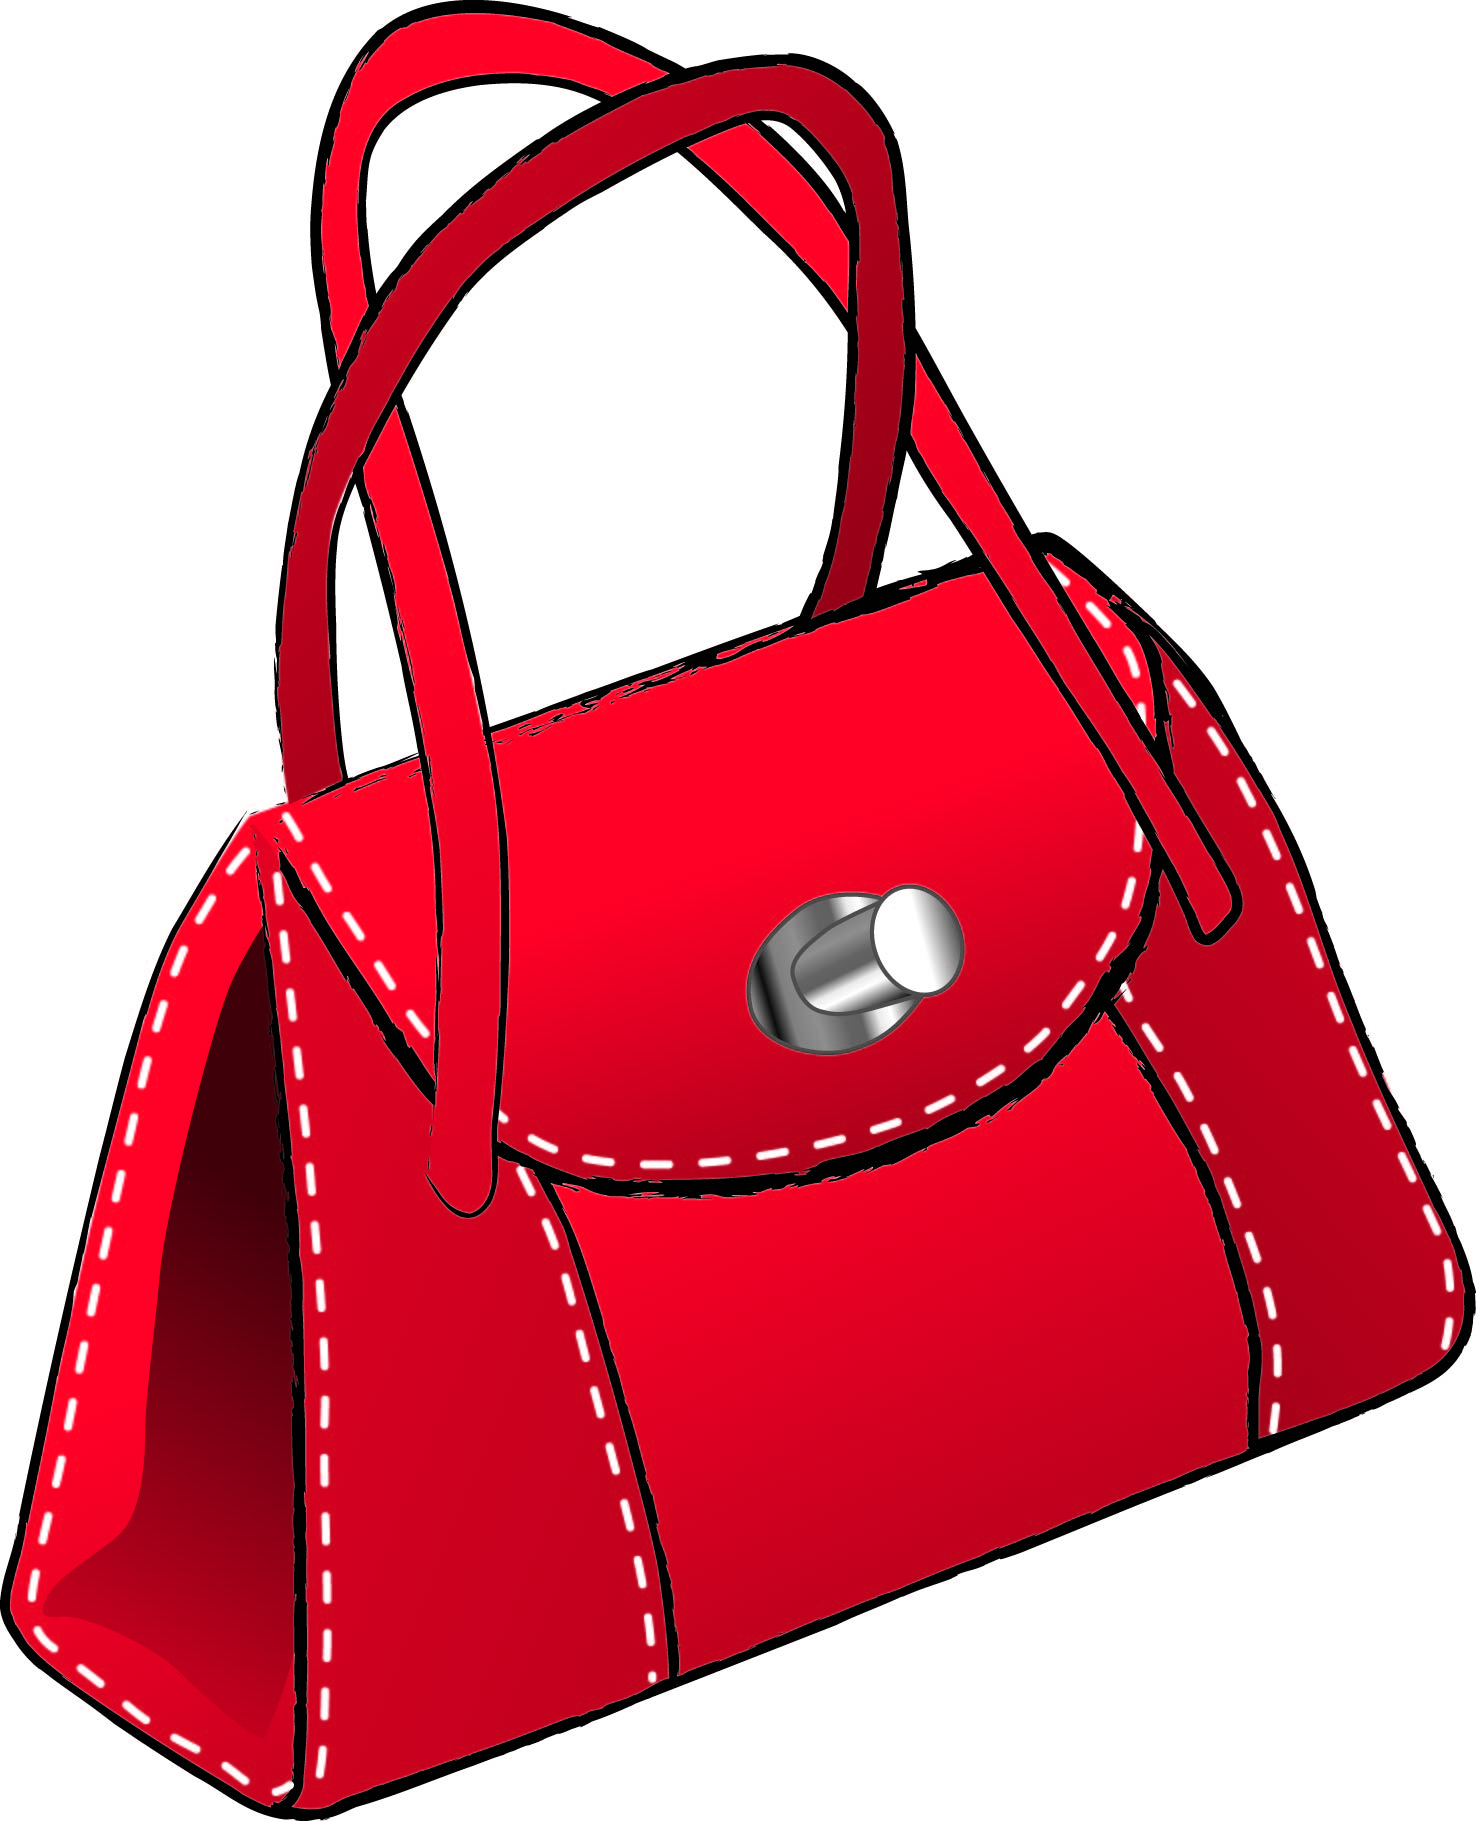 library bag clipart - photo #11